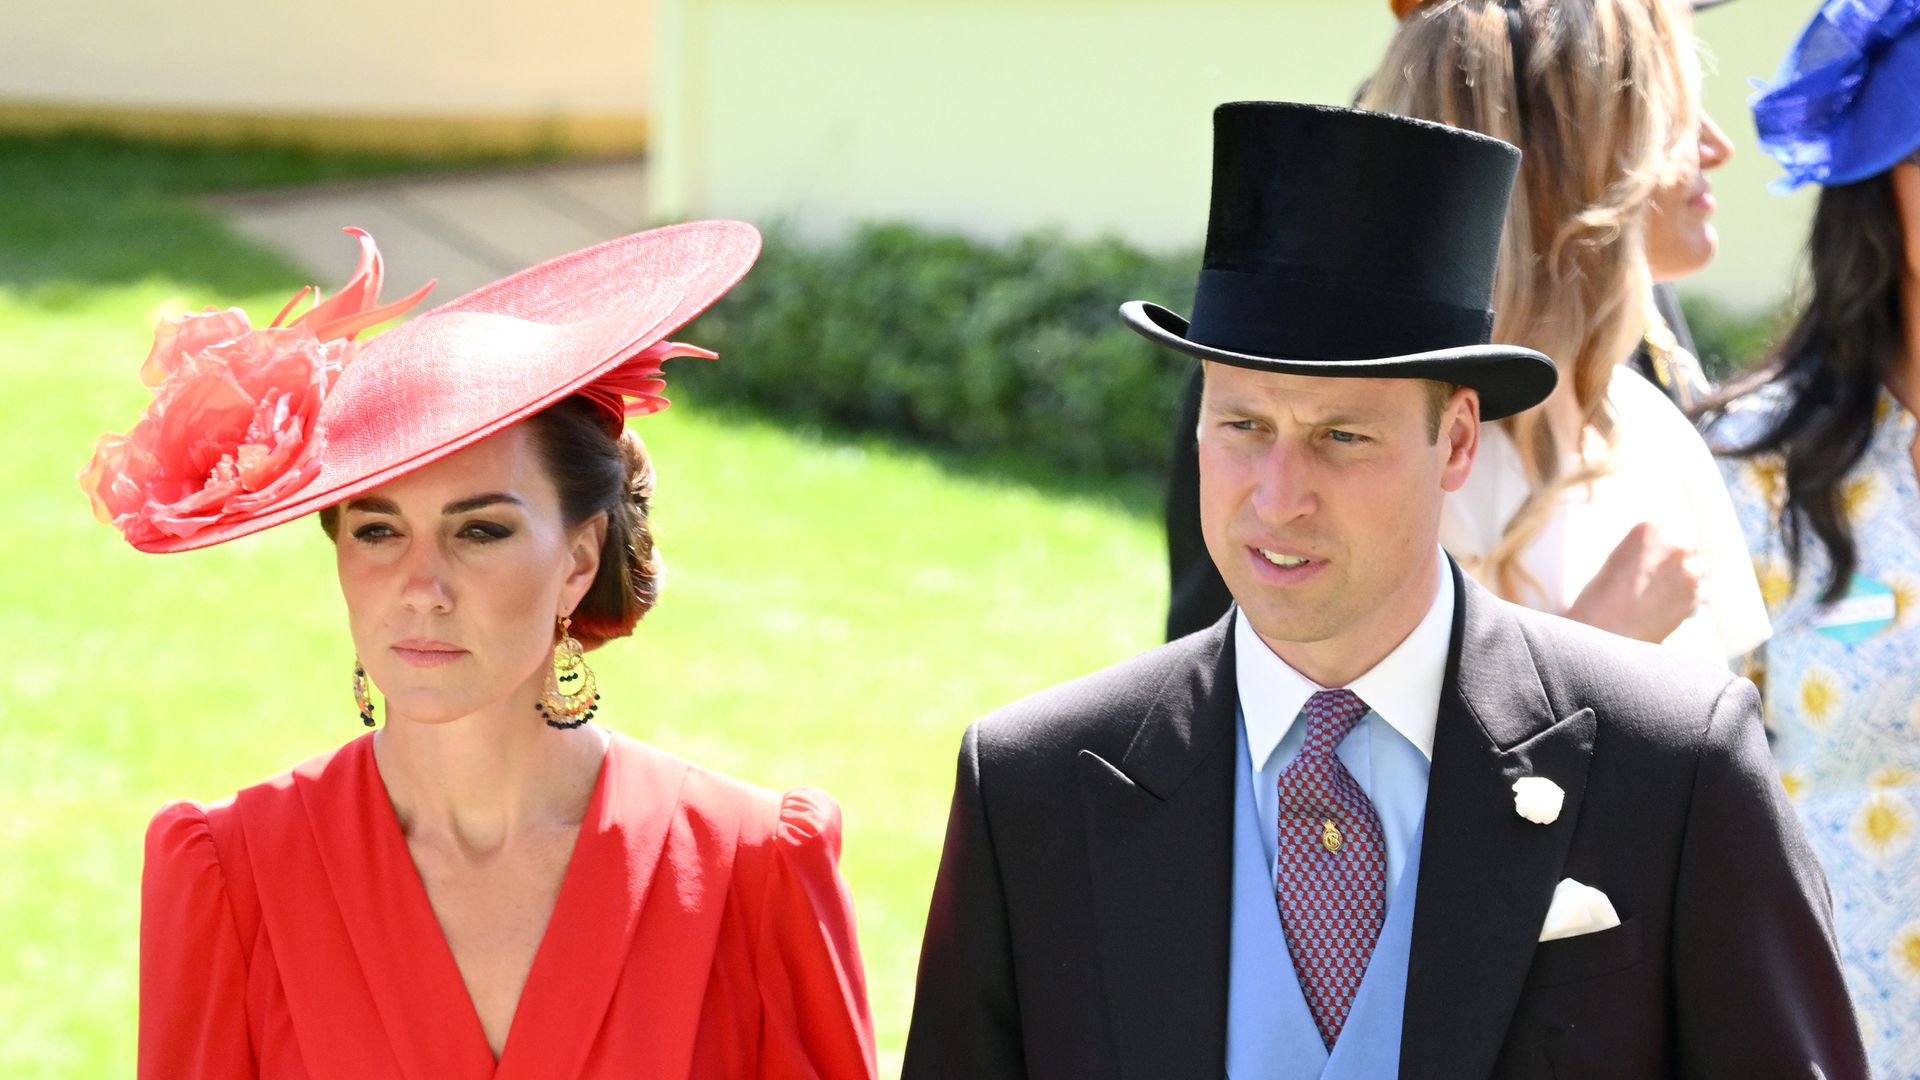 Princess Kate in red dress and Prince William in suit and top hat